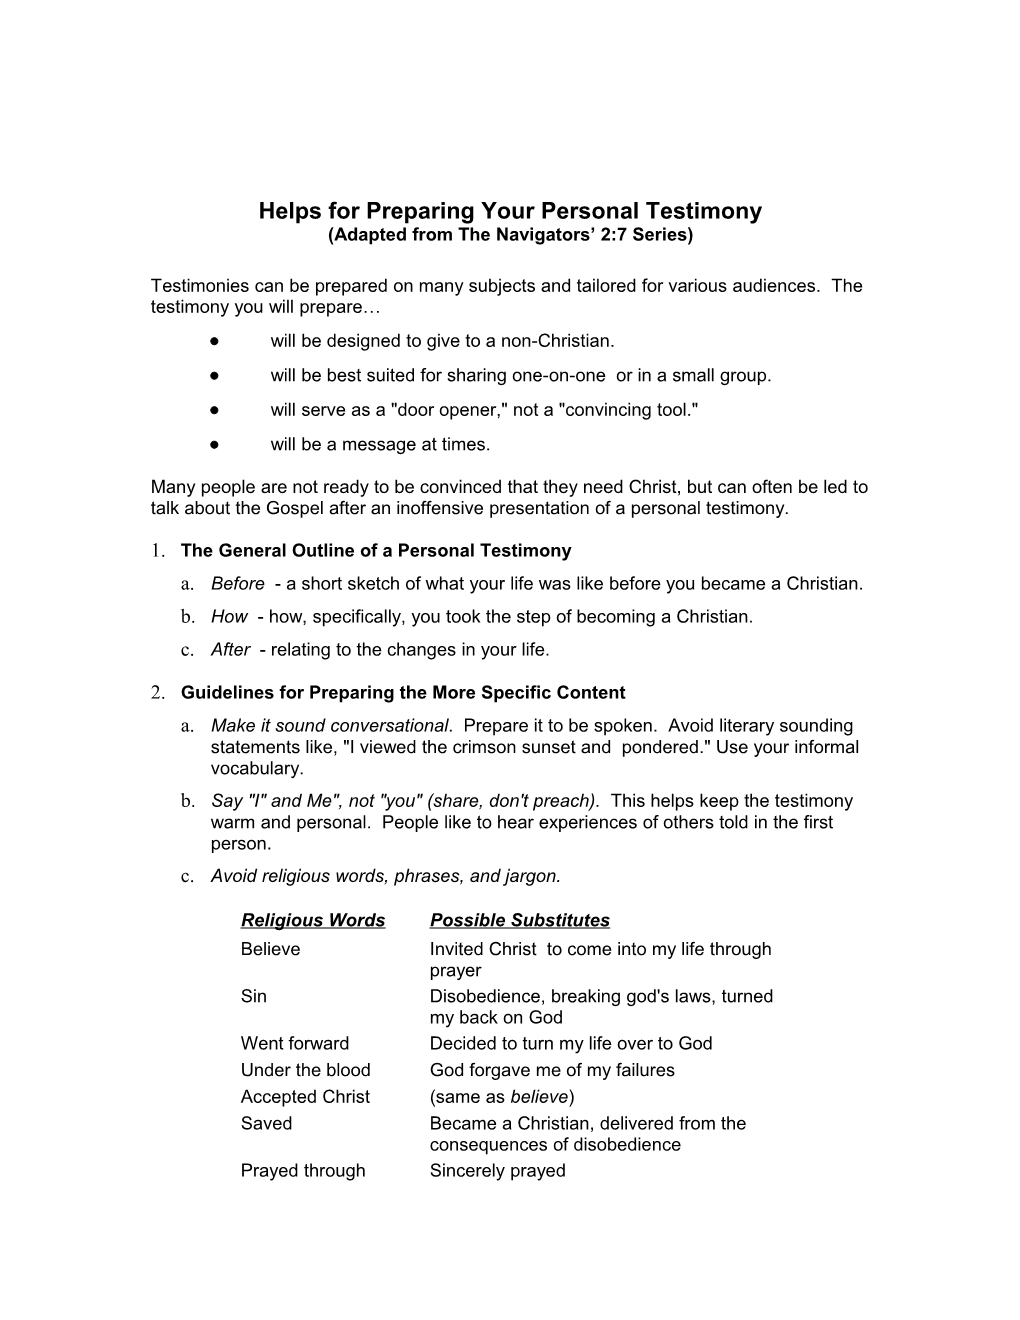 Helps for Preparing Your Personal Testimony